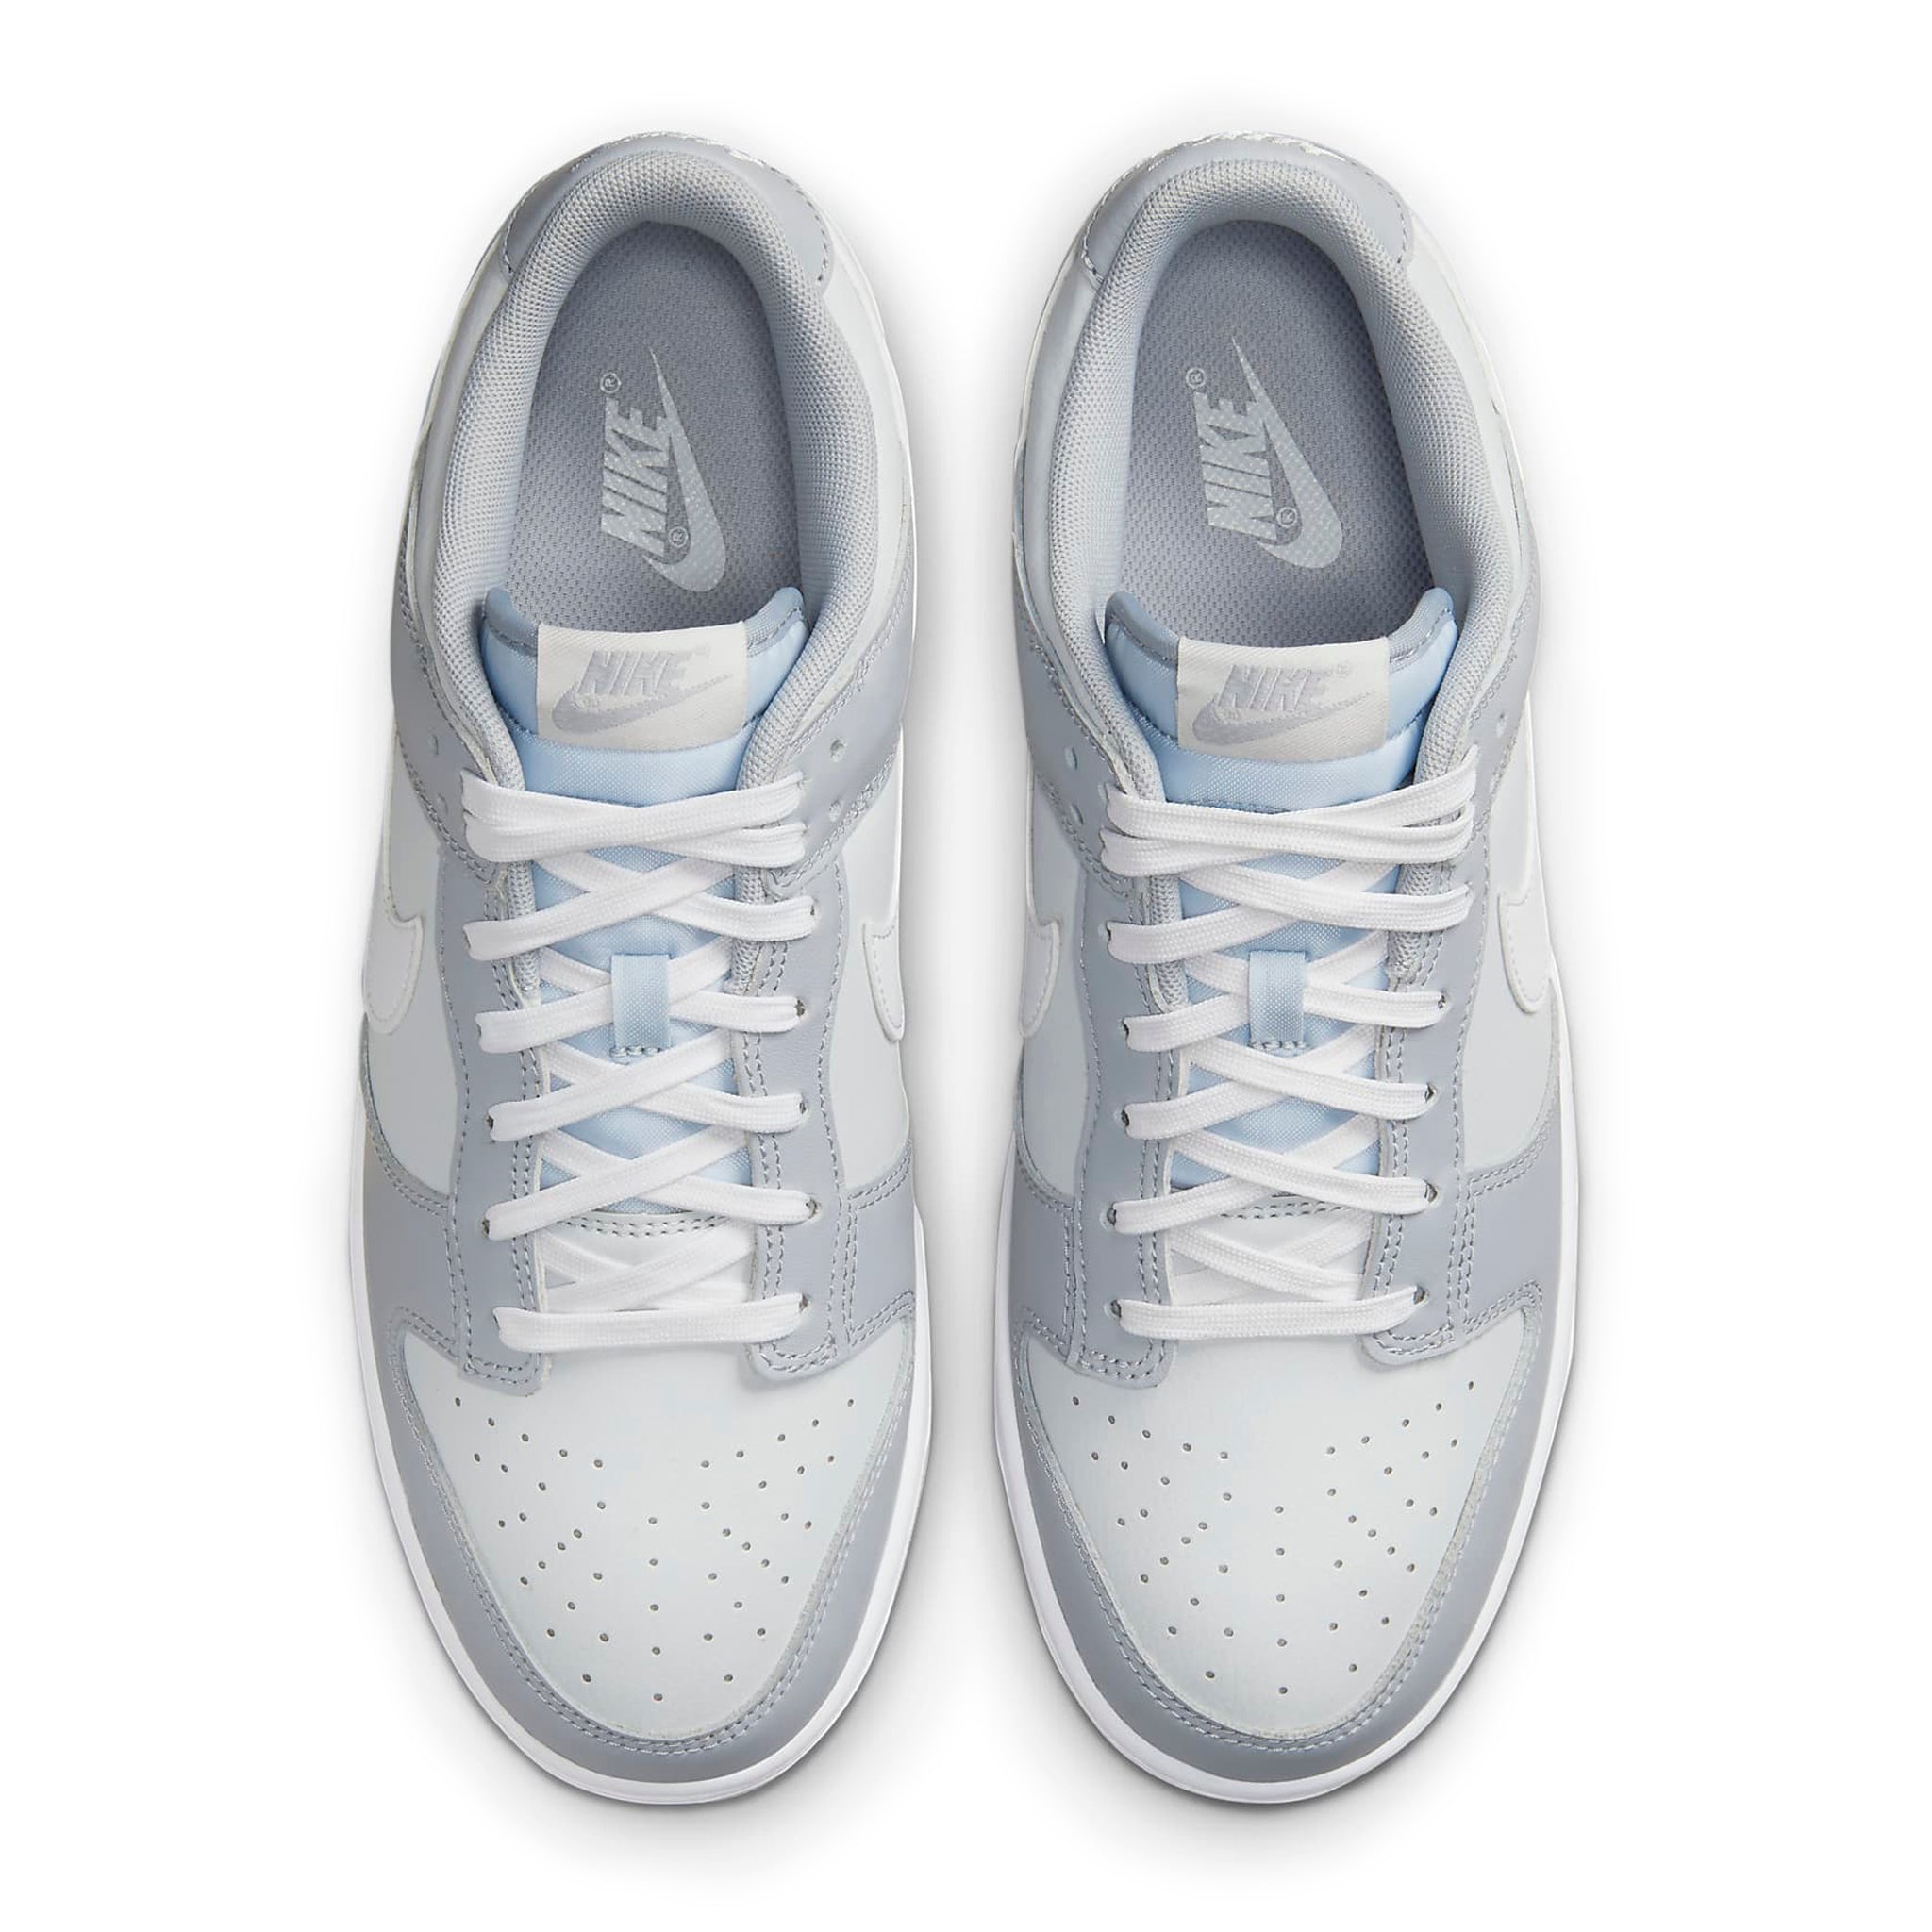 Top down view of Nike Dunk Low Two Tone Grey DJ6188-001